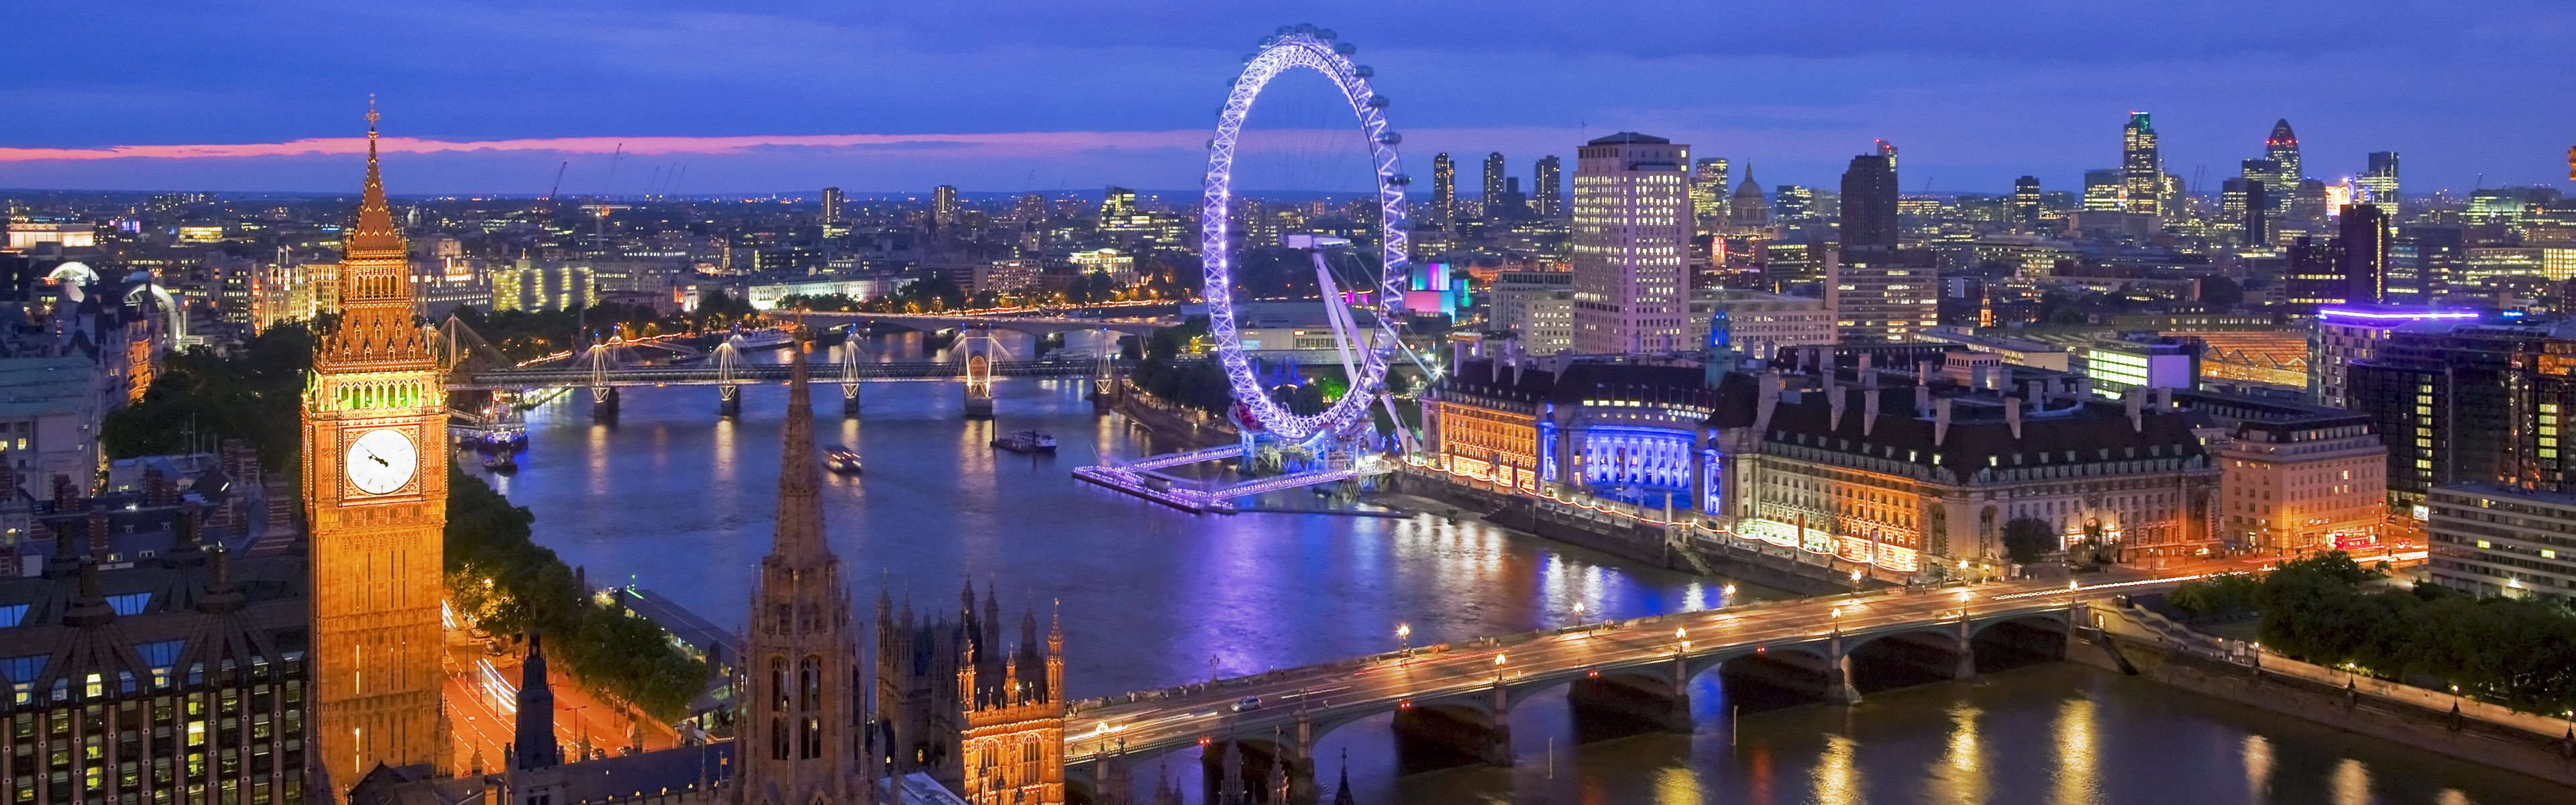 Panoramic view from Victoria Tower on Houses of Parliament and London skyline at night, London, U.K.